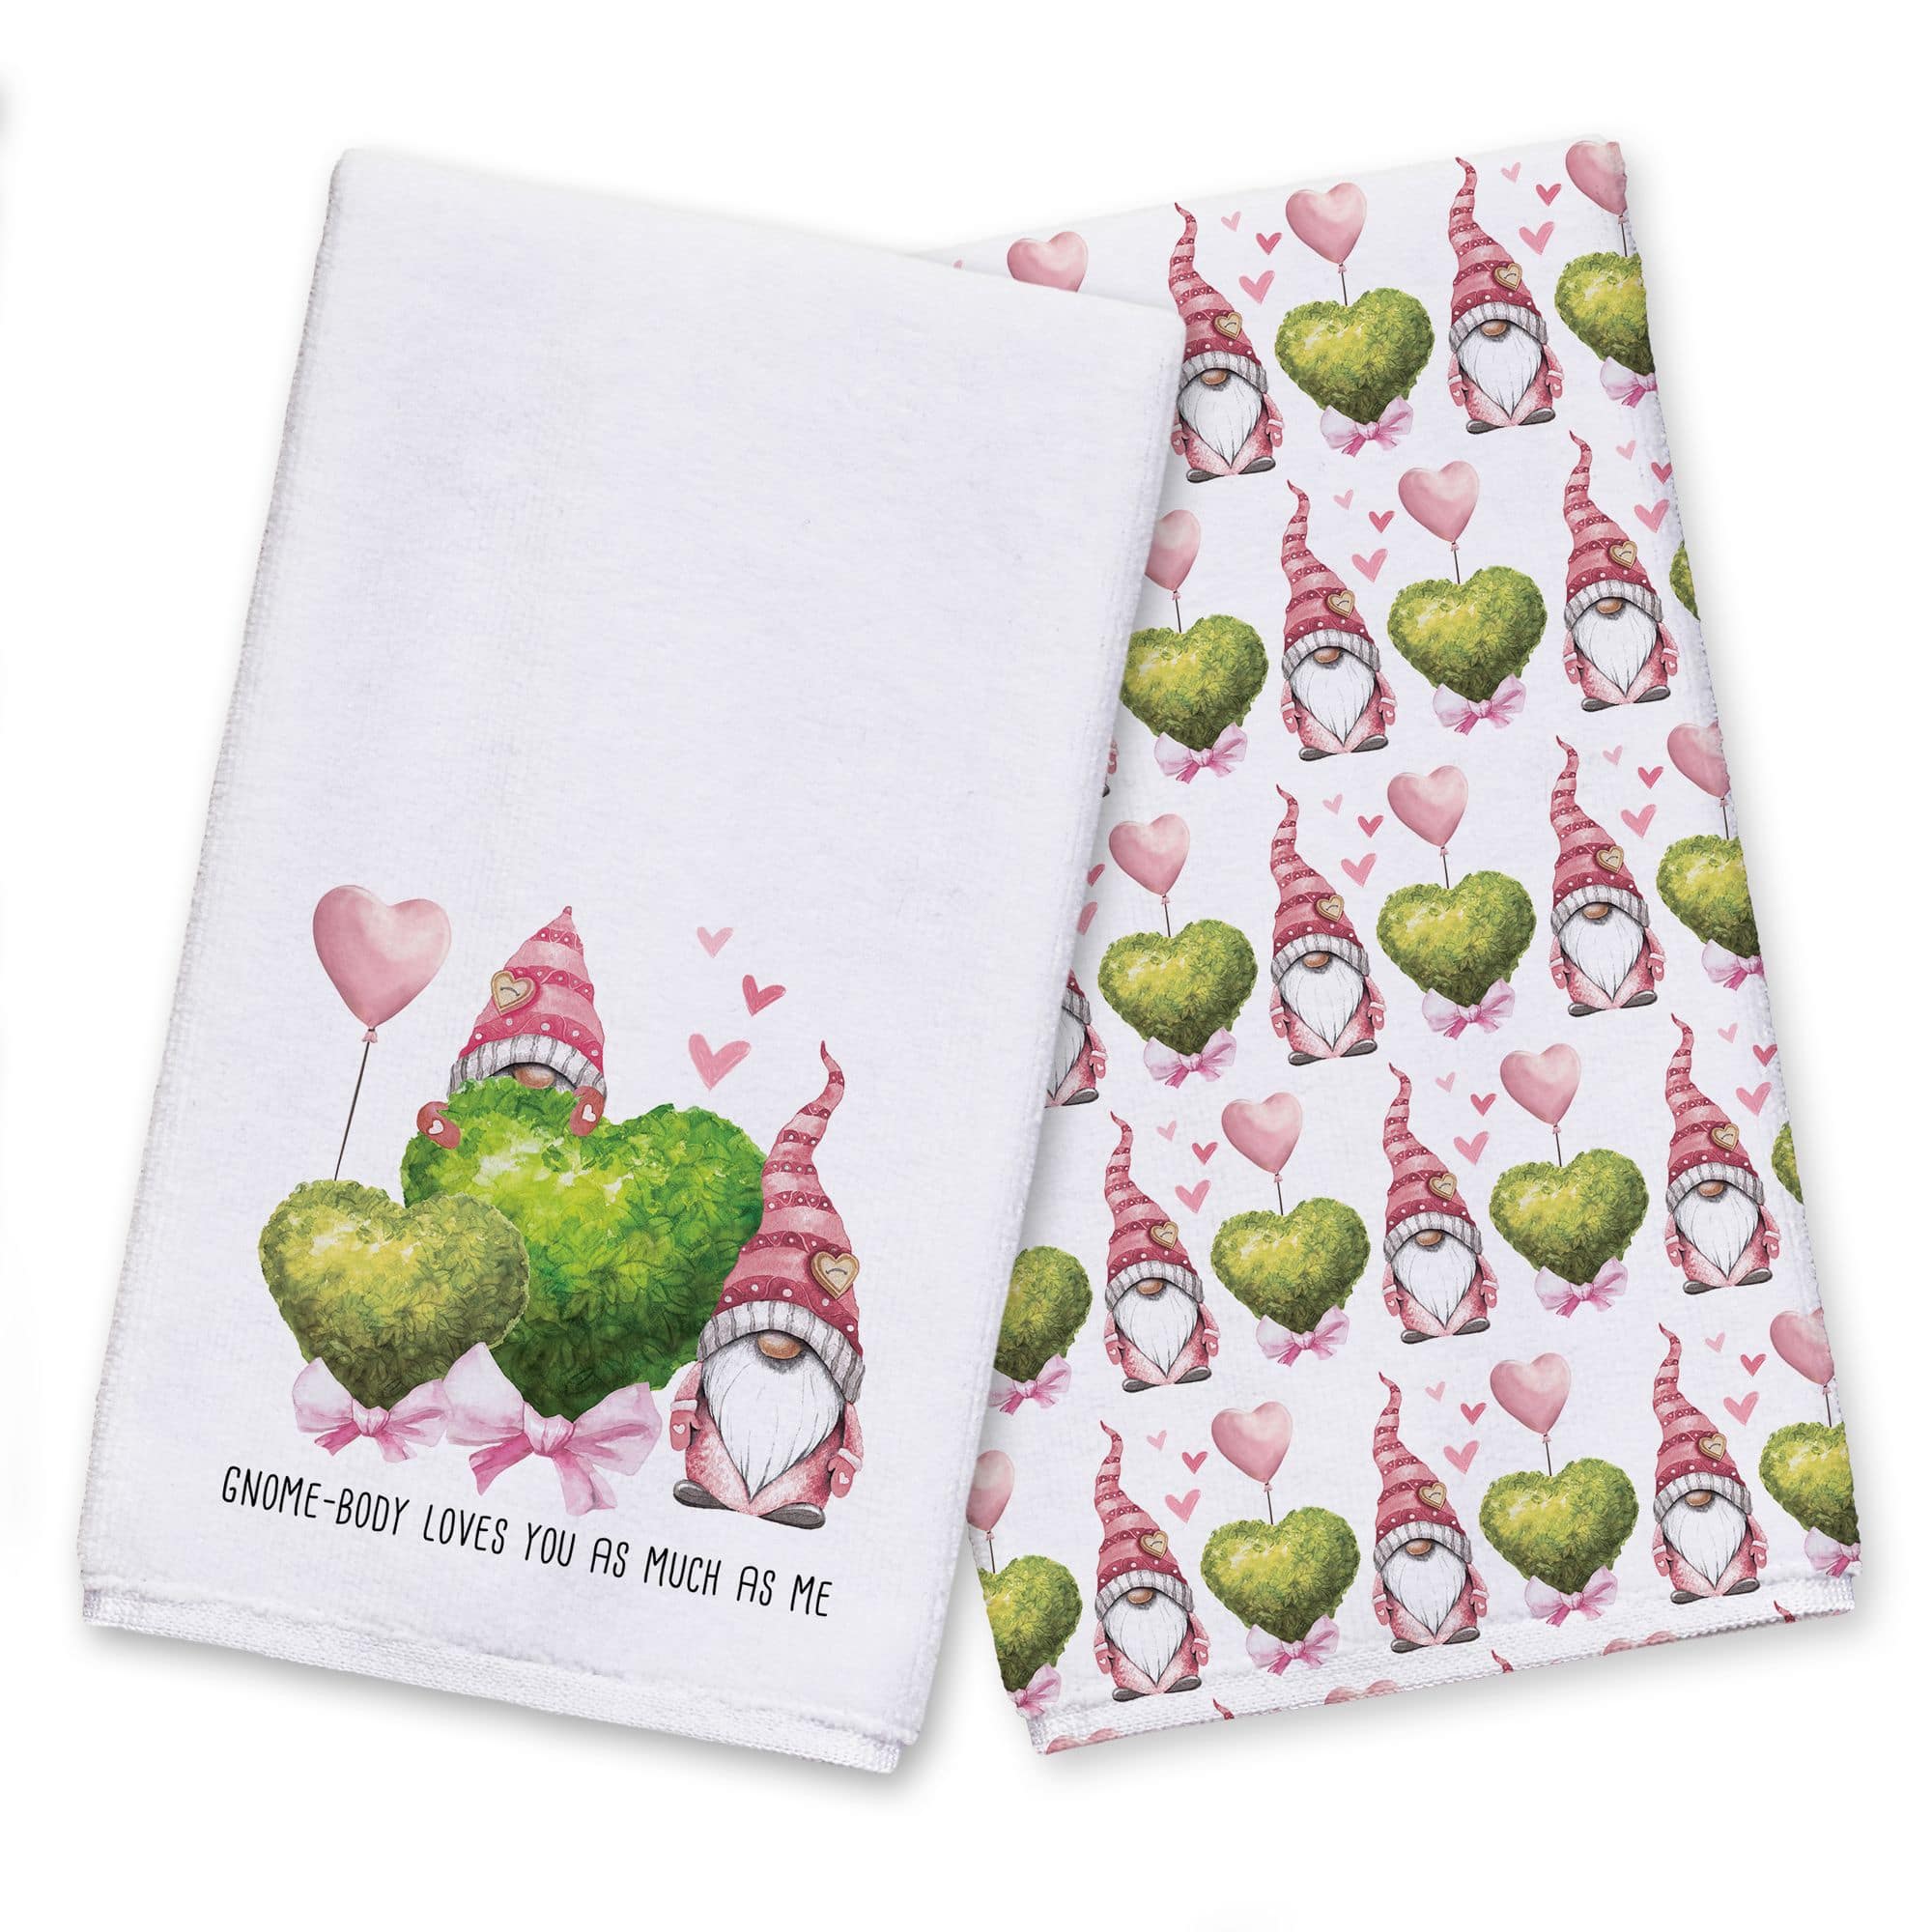 Gnome-Body Loves You as Much as Me Tea Towel - Set of 2